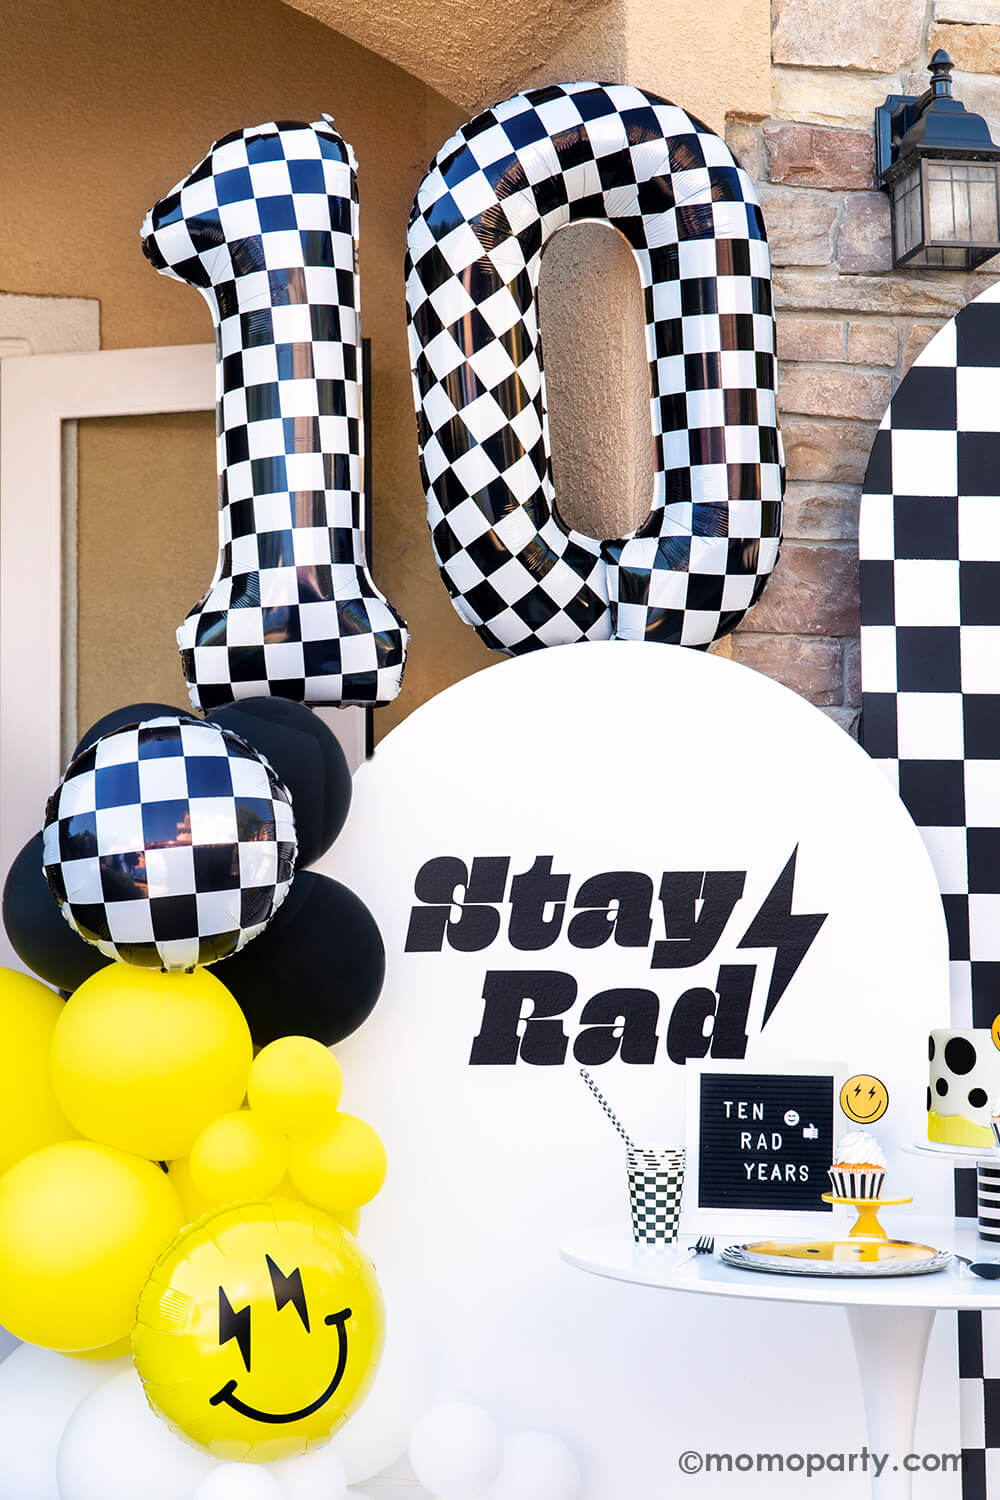 Close up of Momo Party's 'Cool Dude' 10th Birthday bash features a stylish balloon garland in black, white, and yellow, starburst and smiley face foil balloons, and Large Number 10 Checkered Foil Balloons. Against a backdrop of checkerboard and a 'Stay Rad' message, the table dazzles with Smiley Gold Foiled Plates, Check It! Checkered Dinner Plates, Checkered Flag Party Cups, and Black Checkerboard Straws. Complete with a dotted fondant cake, it's a cool 'Ten Rad Years' celebration!